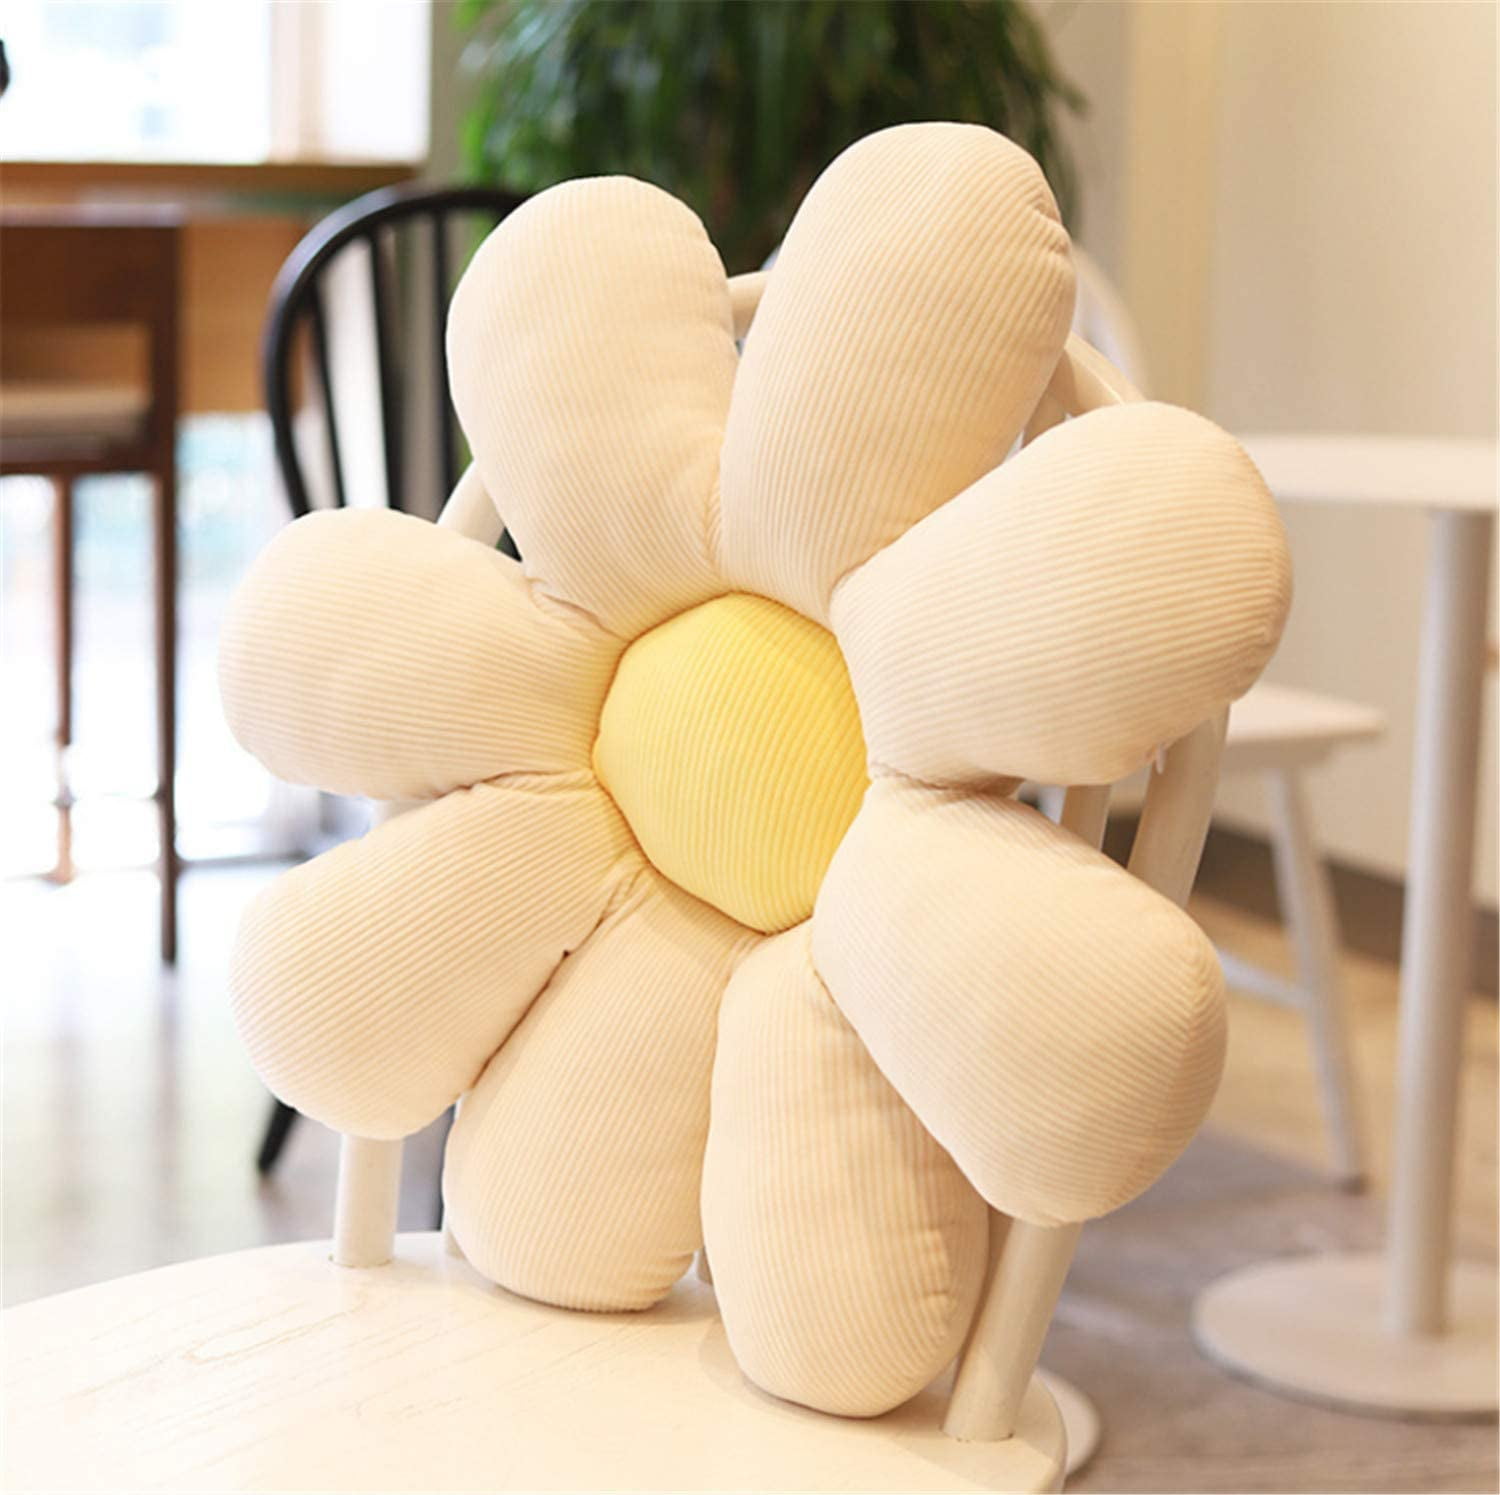 Blue,Medium Tufted Lounging Pillow Pouf,Daisy Flower Shaped Cute Pillow for Kids Reading Watching TV Bed Indoor and Outdoor Decoration LPFNSF Flower Floor Pillow Seating Cushion 